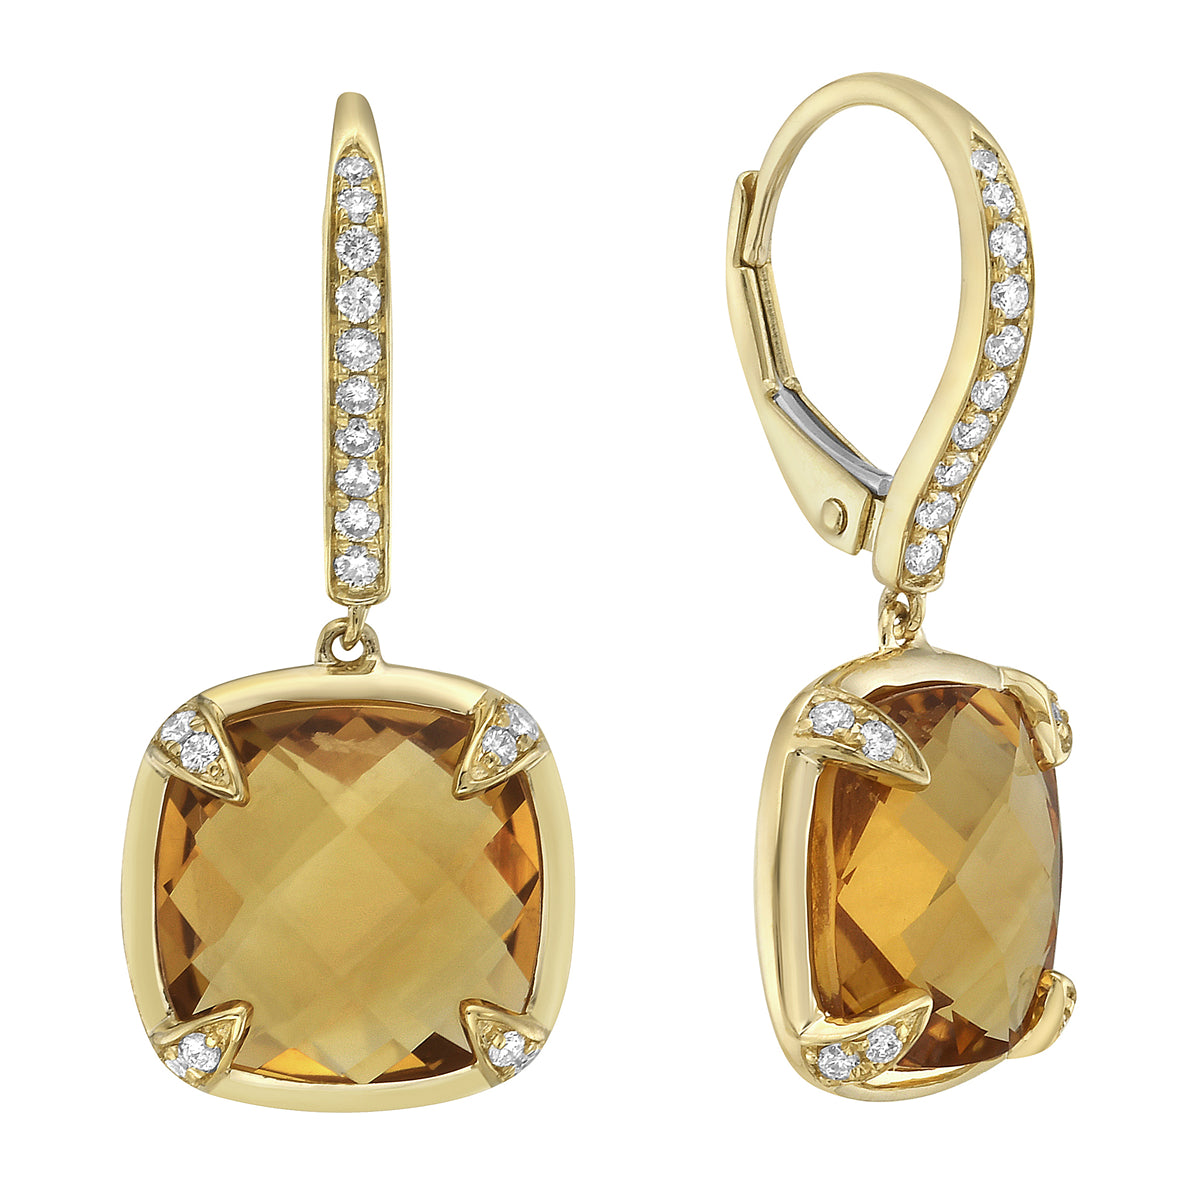 Earrings 14KY/3.1G 2CIT-7.18CT 36RD-0.22CT Citrin